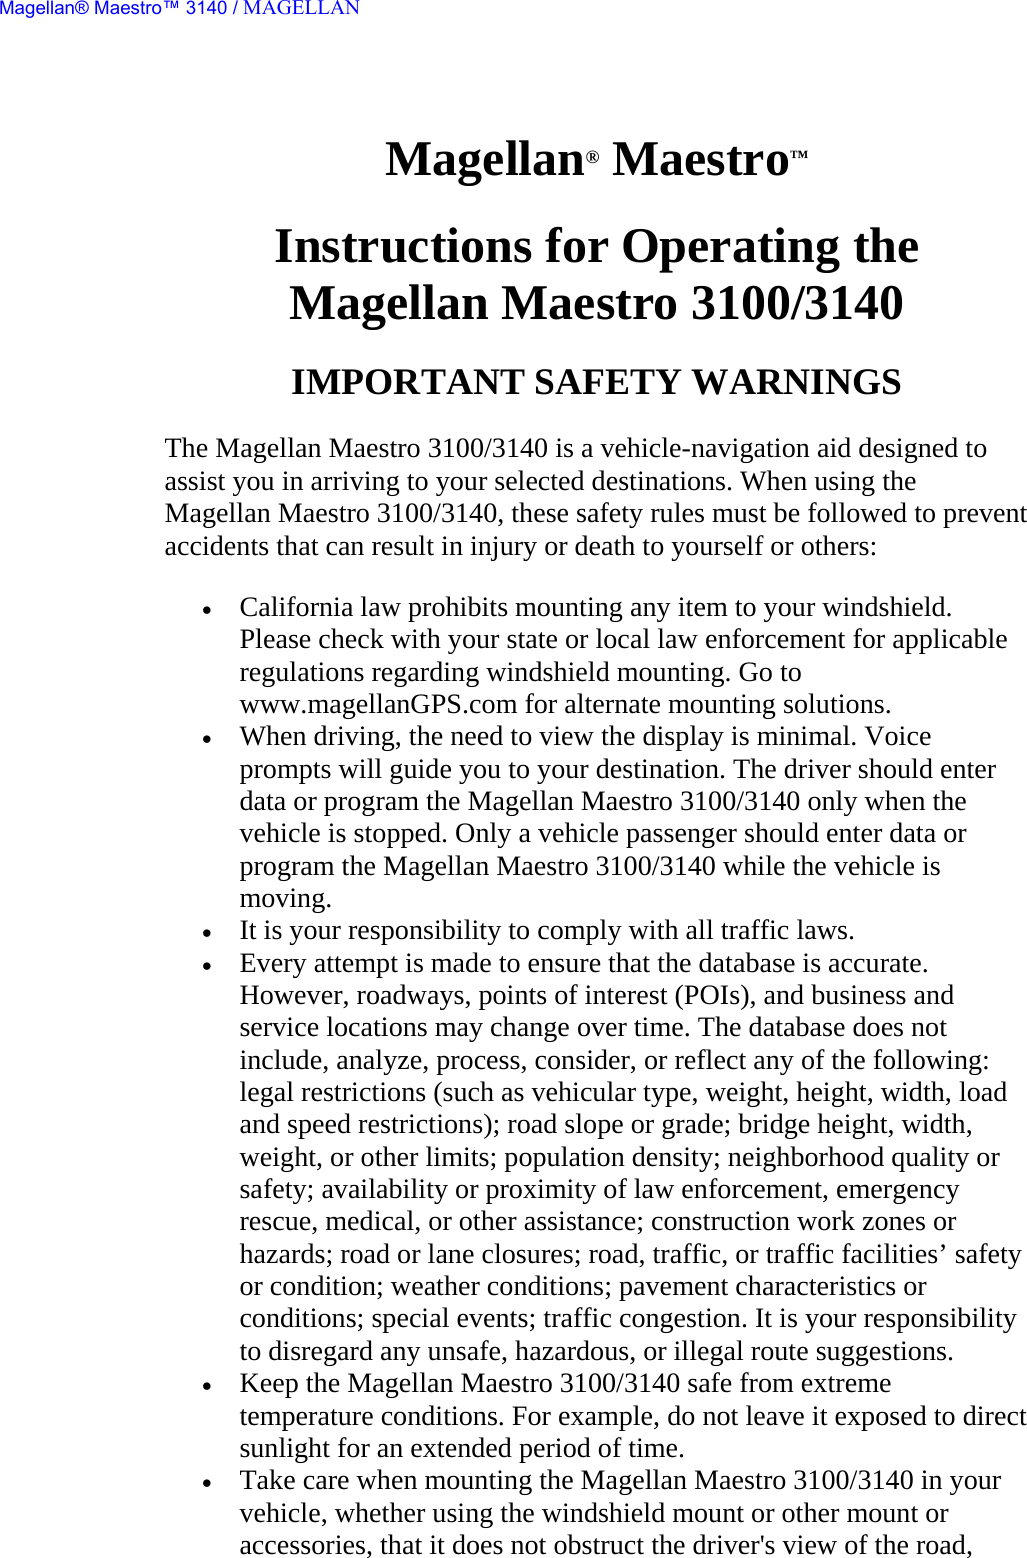 Magellan® Maestro™  Instructions for Operating the  Magellan Maestro 3100/3140  IMPORTANT SAFETY WARNINGS  The Magellan Maestro 3100/3140 is a vehicle-navigation aid designed to assist you in arriving to your selected destinations. When using the Magellan Maestro 3100/3140, these safety rules must be followed to prevent accidents that can result in injury or death to yourself or others:  • California law prohibits mounting any item to your windshield. Please check with your state or local law enforcement for applicable regulations regarding windshield mounting. Go to www.magellanGPS.com for alternate mounting solutions.  • When driving, the need to view the display is minimal. Voice prompts will guide you to your destination. The driver should enter data or program the Magellan Maestro 3100/3140 only when the vehicle is stopped. Only a vehicle passenger should enter data or program the Magellan Maestro 3100/3140 while the vehicle is moving.  • It is your responsibility to comply with all traffic laws.  • Every attempt is made to ensure that the database is accurate. However, roadways, points of interest (POIs), and business and service locations may change over time. The database does not include, analyze, process, consider, or reflect any of the following: legal restrictions (such as vehicular type, weight, height, width, load and speed restrictions); road slope or grade; bridge height, width, weight, or other limits; population density; neighborhood quality or safety; availability or proximity of law enforcement, emergency rescue, medical, or other assistance; construction work zones or hazards; road or lane closures; road, traffic, or traffic facilities’ safety or condition; weather conditions; pavement characteristics or conditions; special events; traffic congestion. It is your responsibility to disregard any unsafe, hazardous, or illegal route suggestions.  • Keep the Magellan Maestro 3100/3140 safe from extreme temperature conditions. For example, do not leave it exposed to direct sunlight for an extended period of time.  • Take care when mounting the Magellan Maestro 3100/3140 in your vehicle, whether using the windshield mount or other mount or accessories, that it does not obstruct the driver&apos;s view of the road, Magellan® Maestro™ 3140 / MAGELLAN